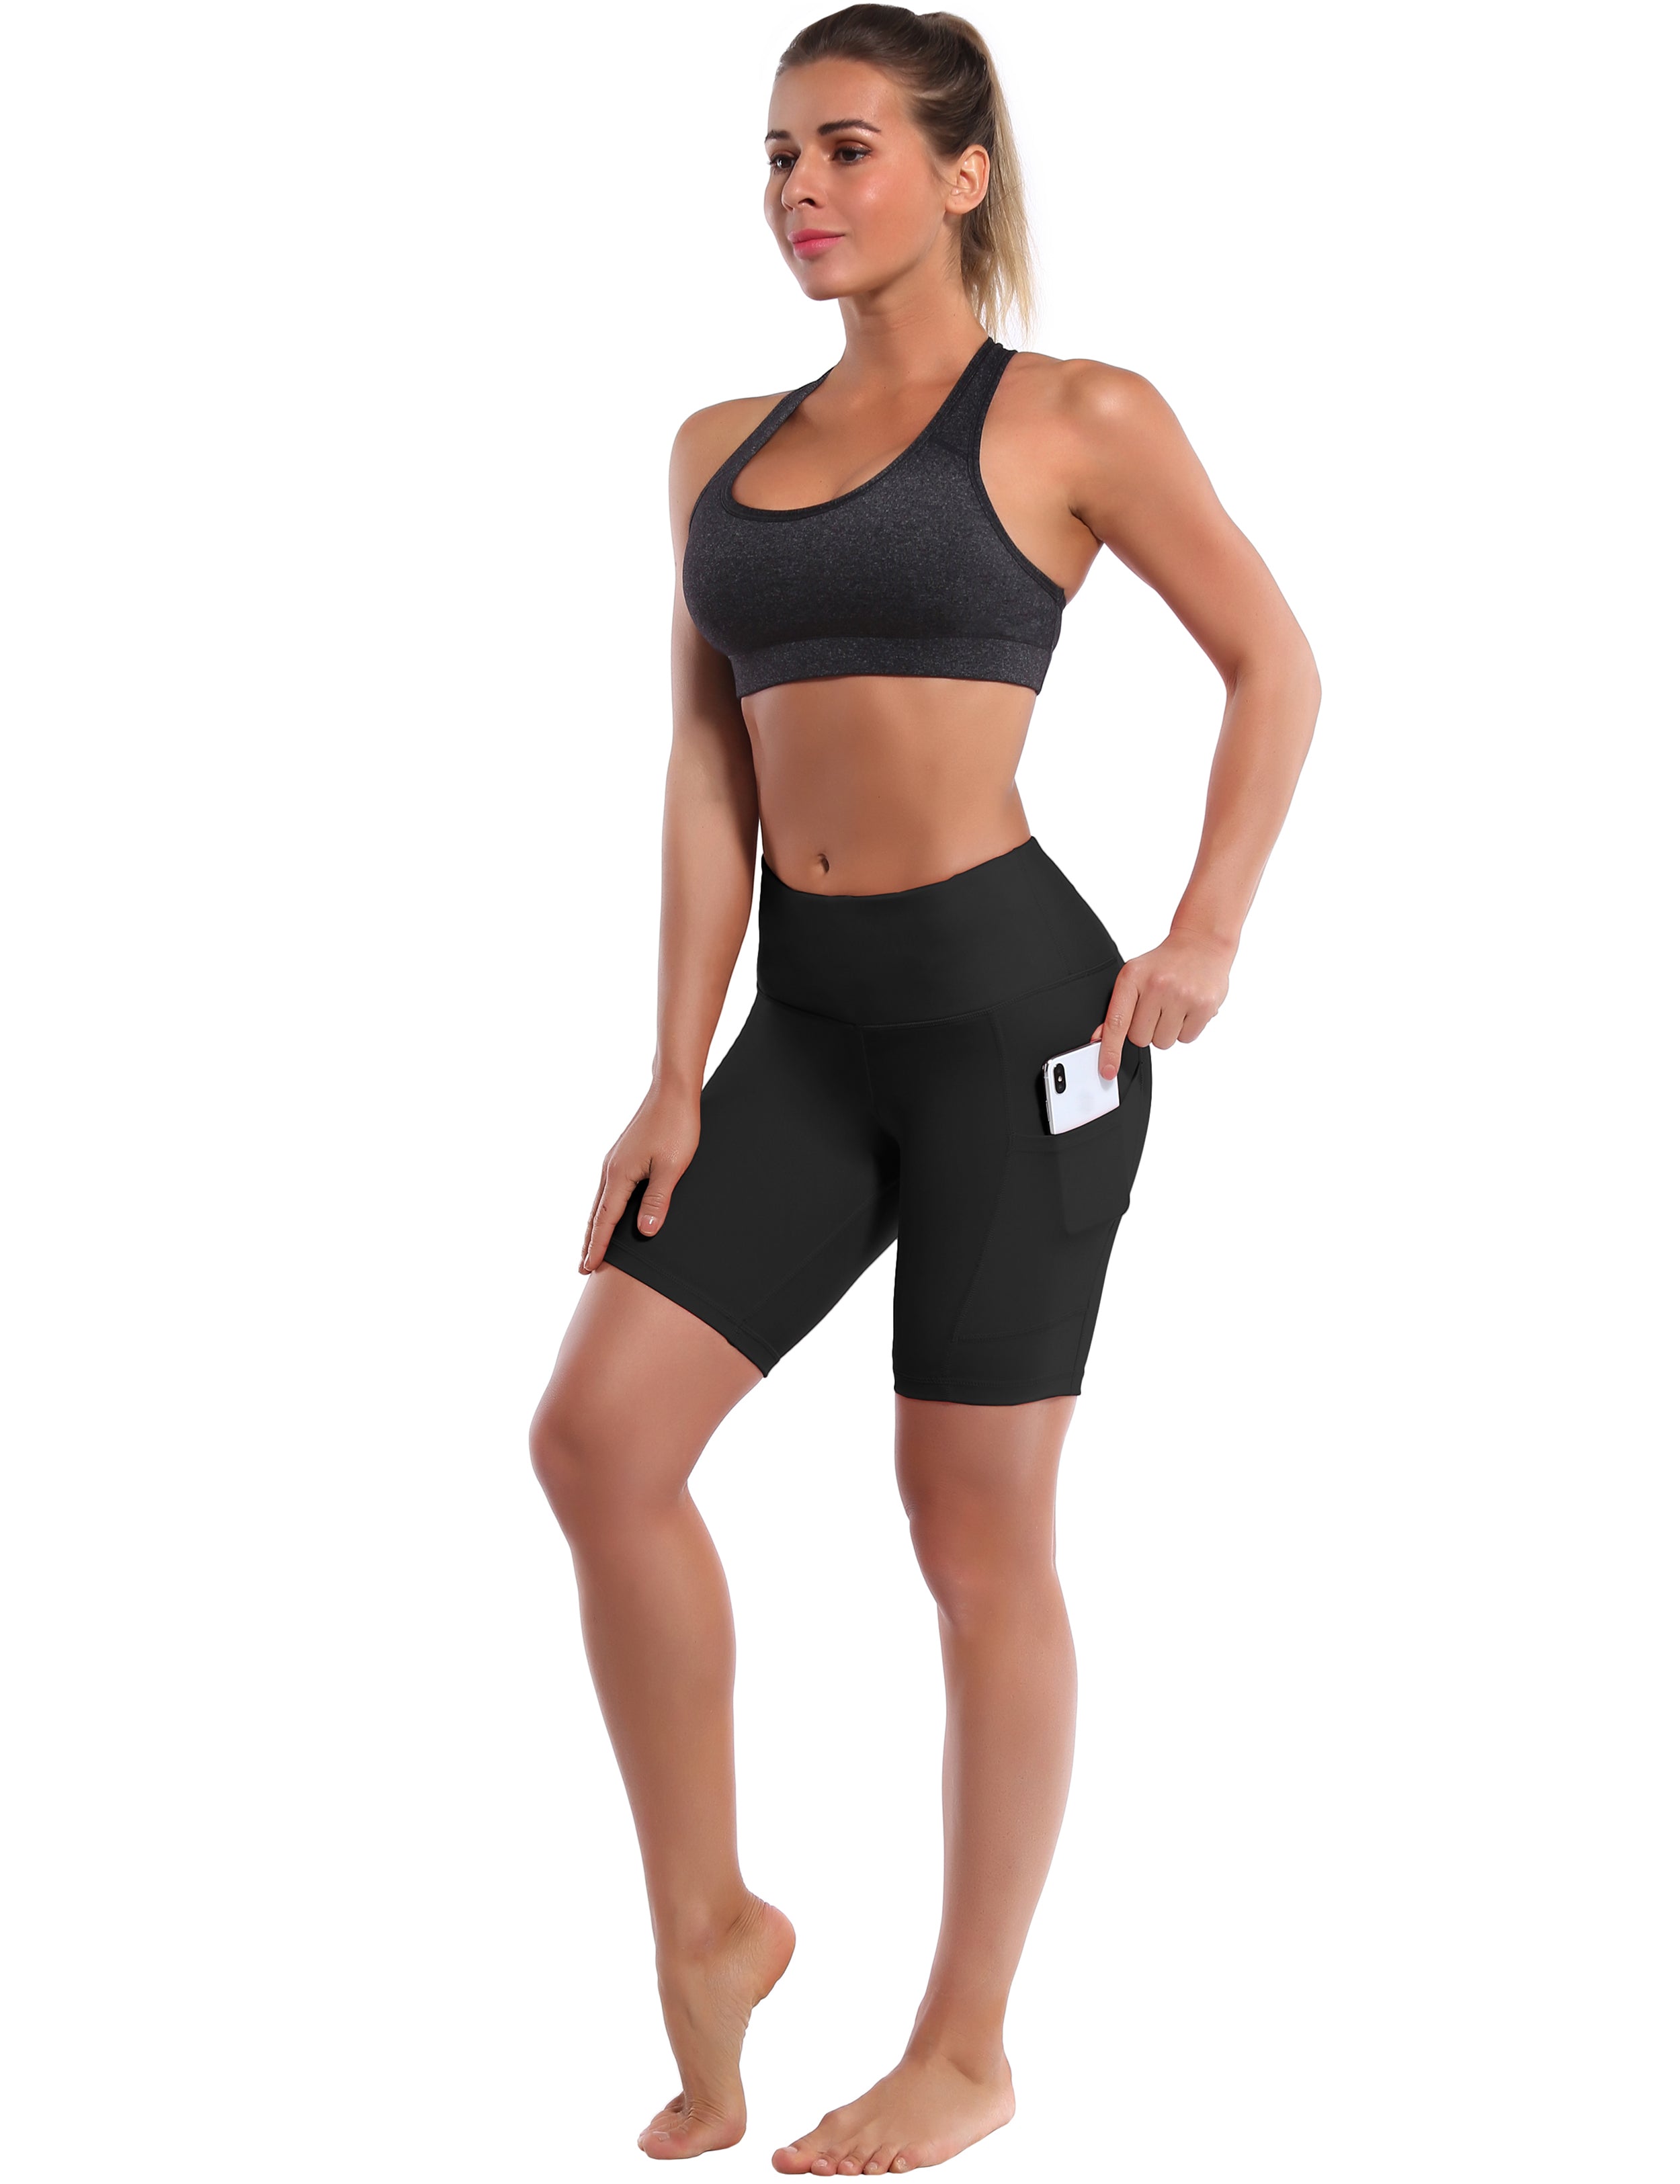 8" Side Pockets Jogging Shorts black Sleek, soft, smooth and totally comfortable: our newest style is here. Softest-ever fabric High elasticity High density 4-way stretch Fabric doesn't attract lint easily No see-through Moisture-wicking Machine wash 75% Nylon, 25% Spandex